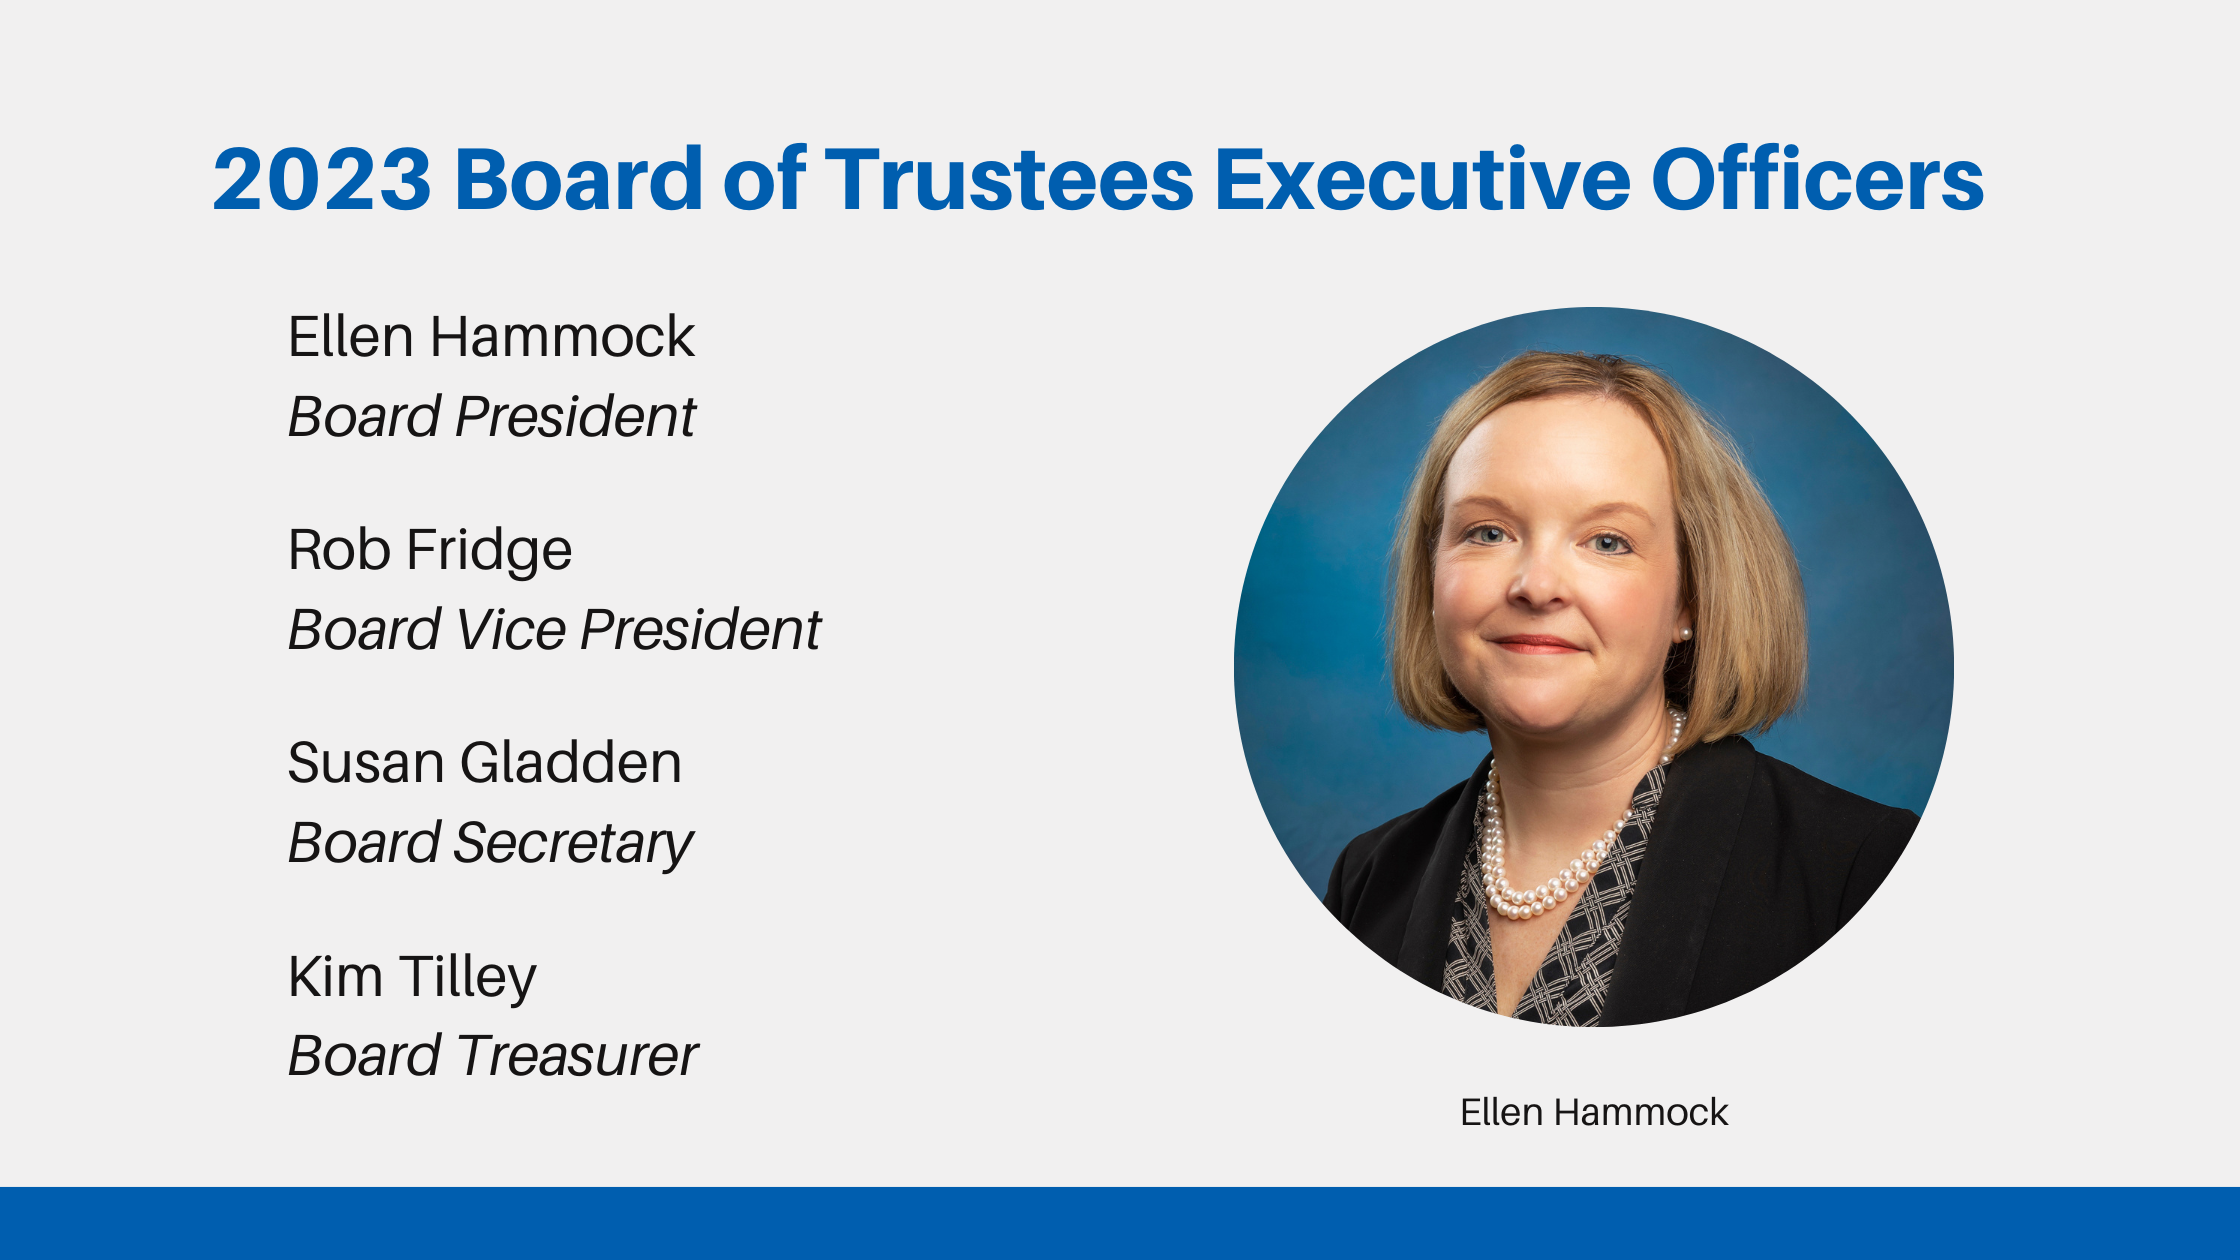 The Kitchen Announces 2023 Board of Trustees Executive Officers